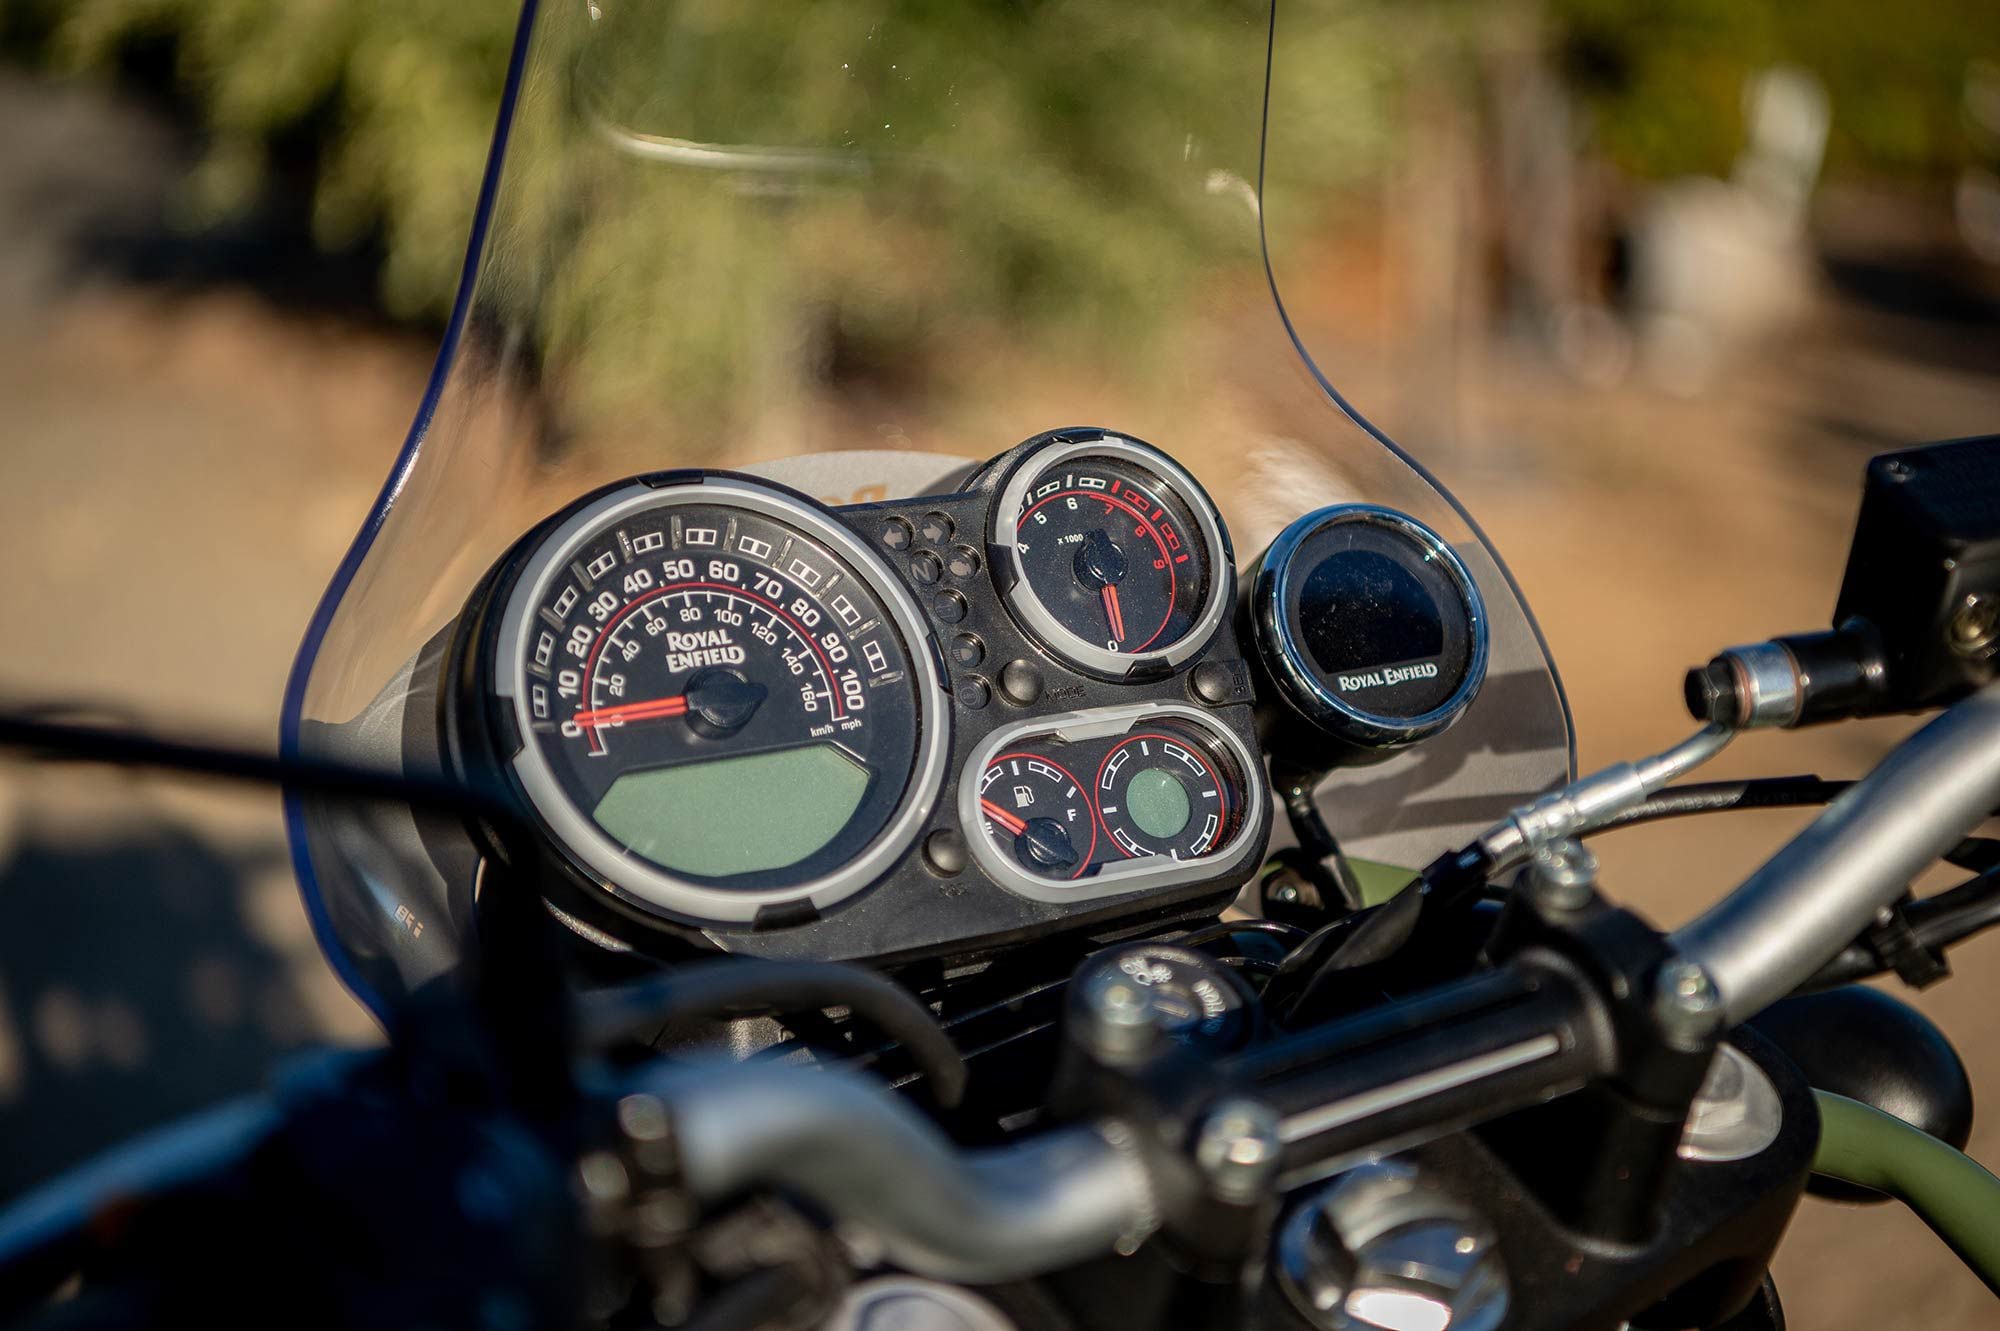 Royal Enfield’s new Tripper Navigation works seamlessly once connected to your phone through the North America Royal Enfield app and is a great addition to this funky adventure motorcycle.